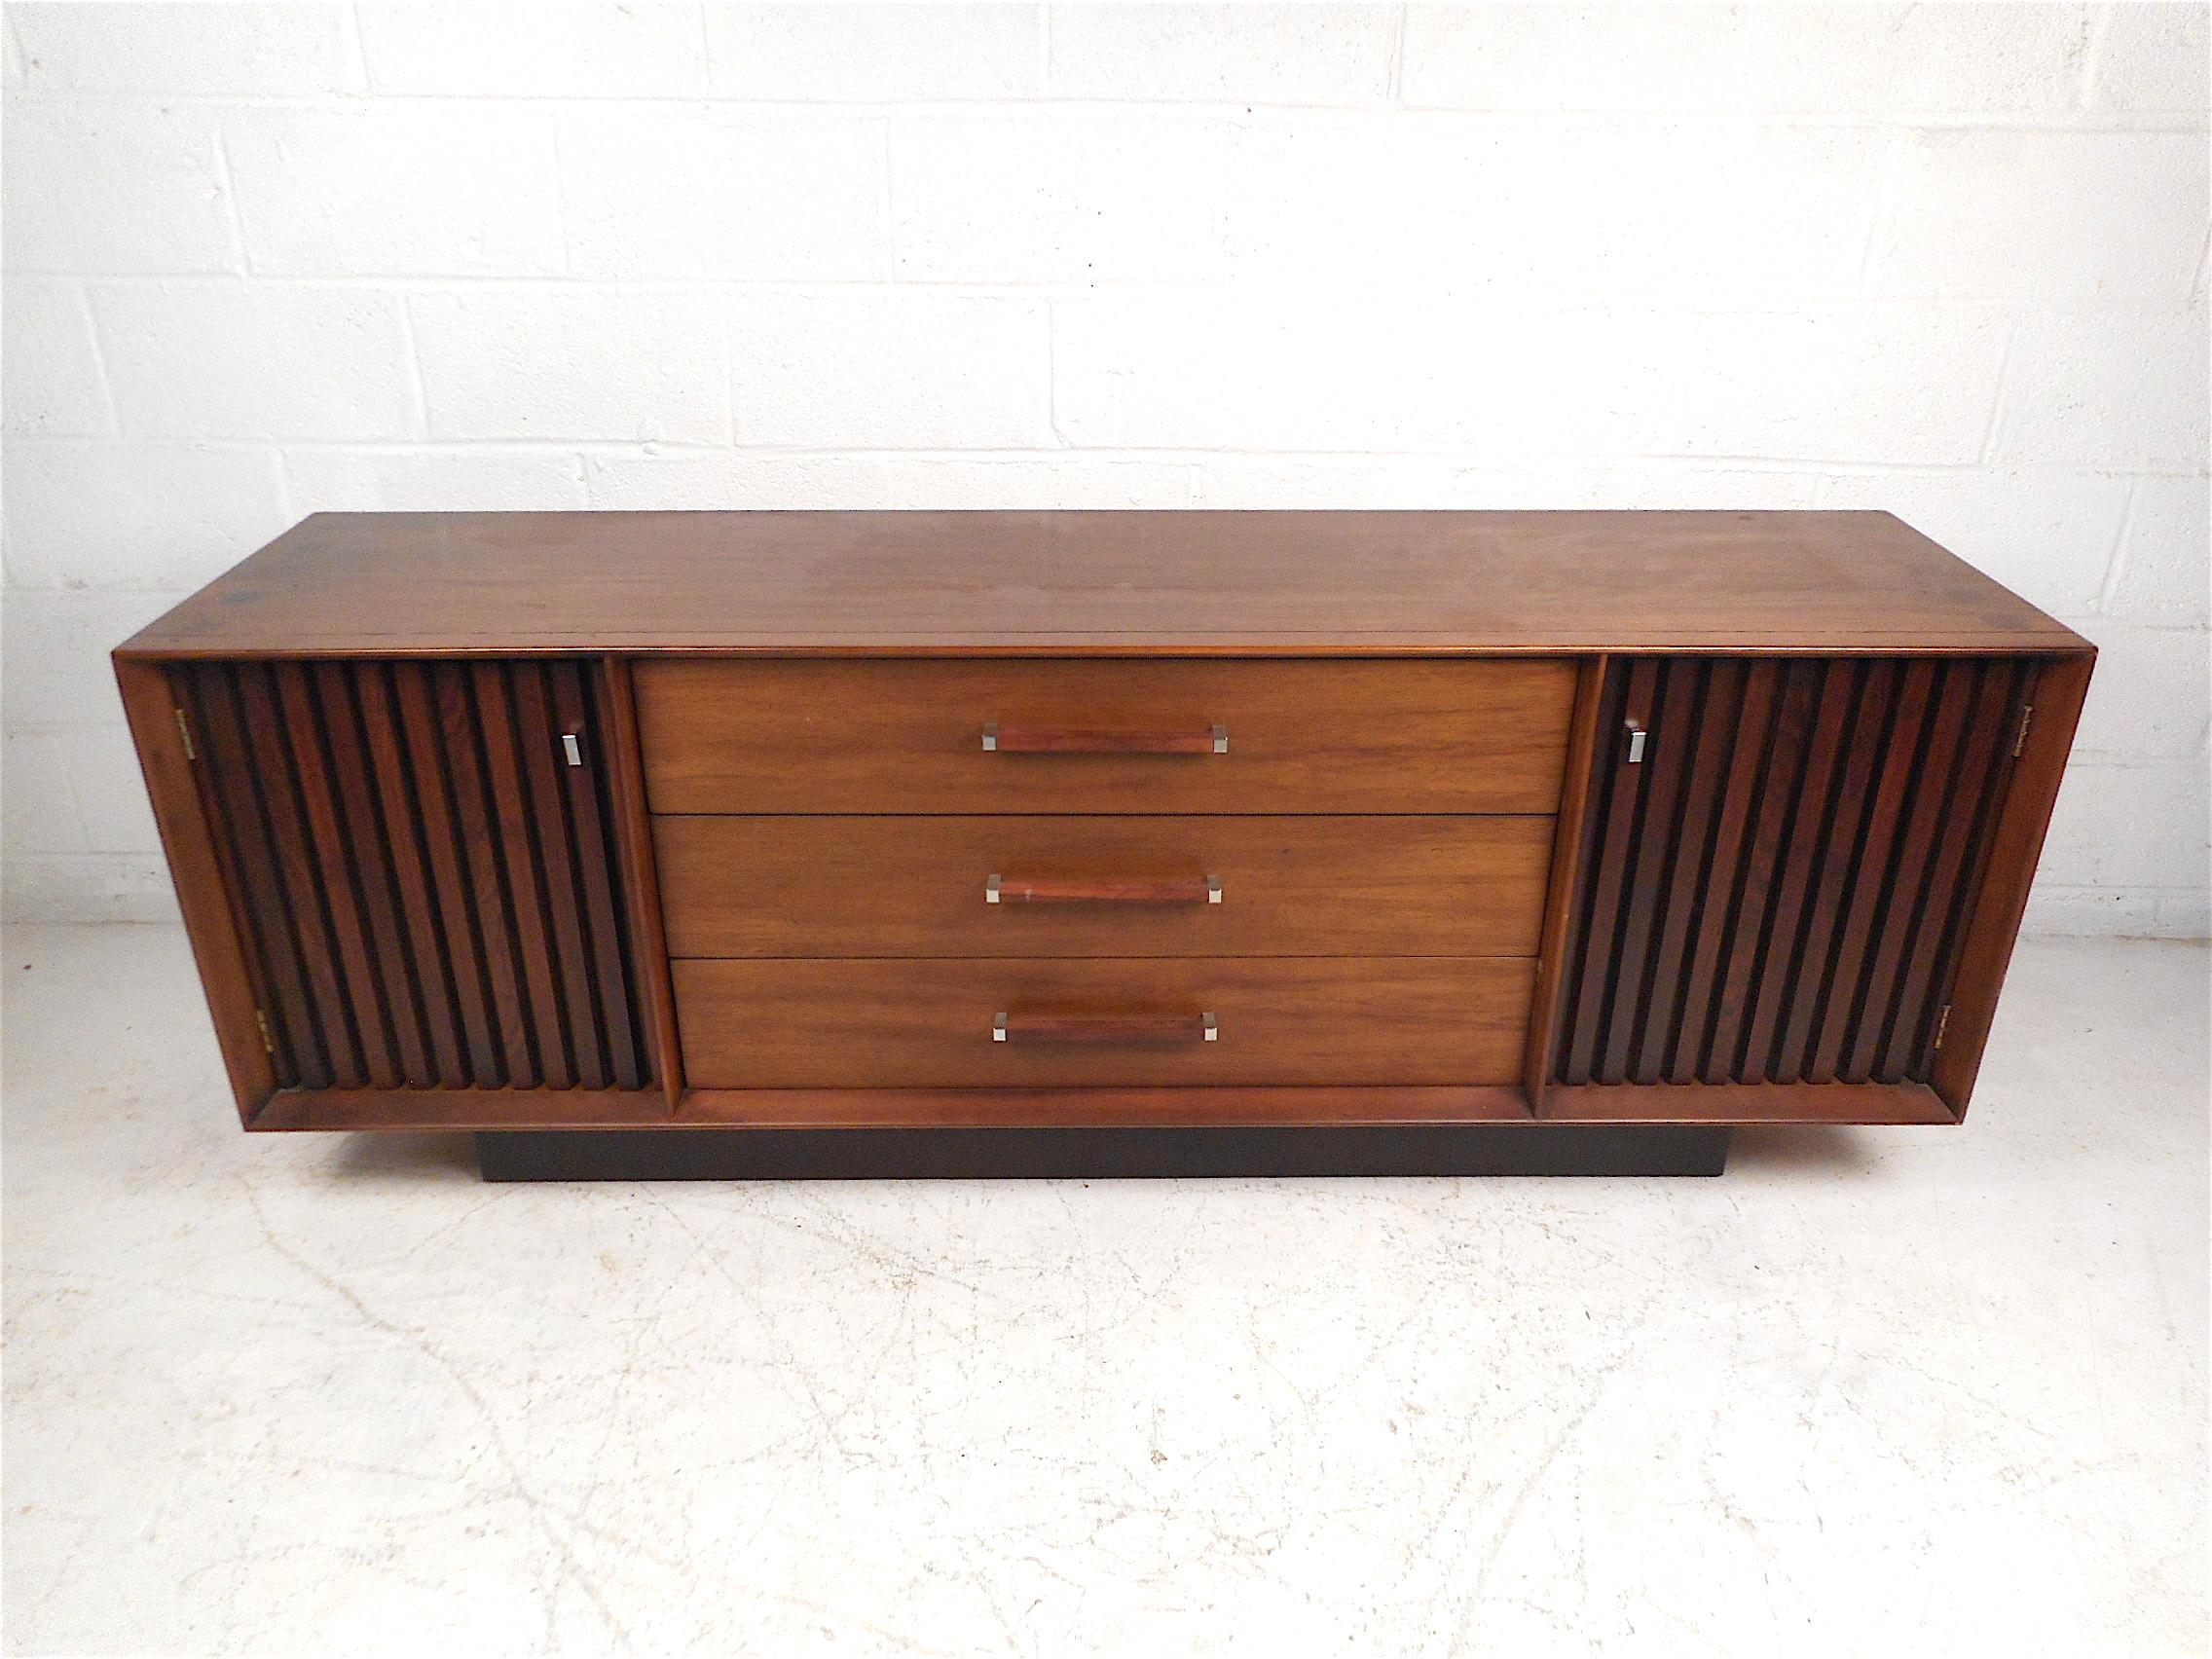 Mid-Century Modern Midcentury Dresser and Nightstands by Lane Furniture Co.